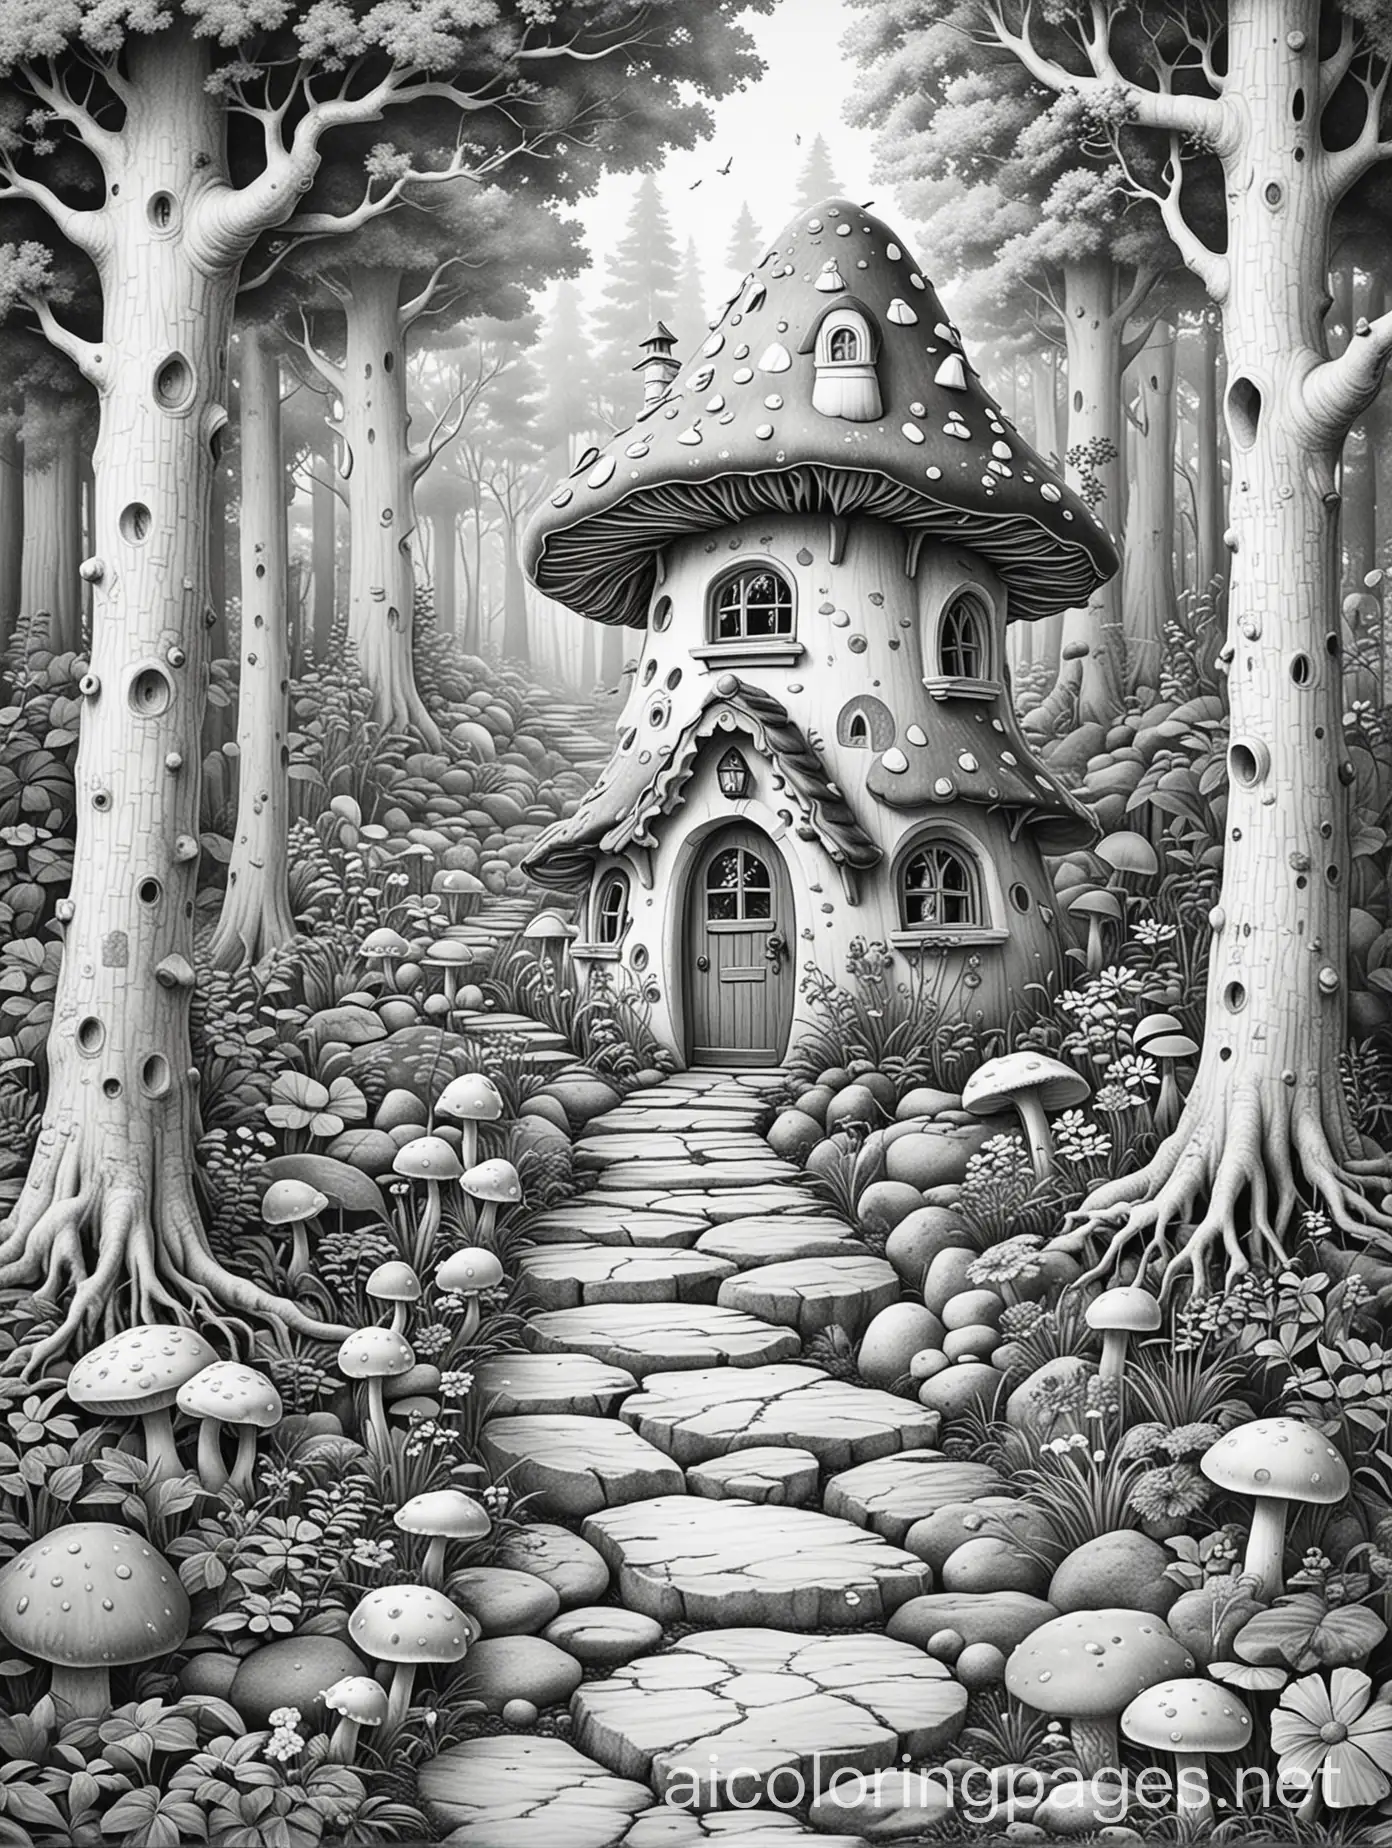 Create an intricately designed toadstool house among the trees with a cobblestone path. Fairytale theme. white background, Coloring Page, black and white only, no grayscale, clean line art, white background, complex, Ample White Space. , Coloring Page, black and white, line art, white background, Simplicity, Ample White Space. The background of the coloring page is plain white to make it easy for young children to color within the lines. The outlines of all the subjects are easy to distinguish, making it simple for kids to color without too much difficulty